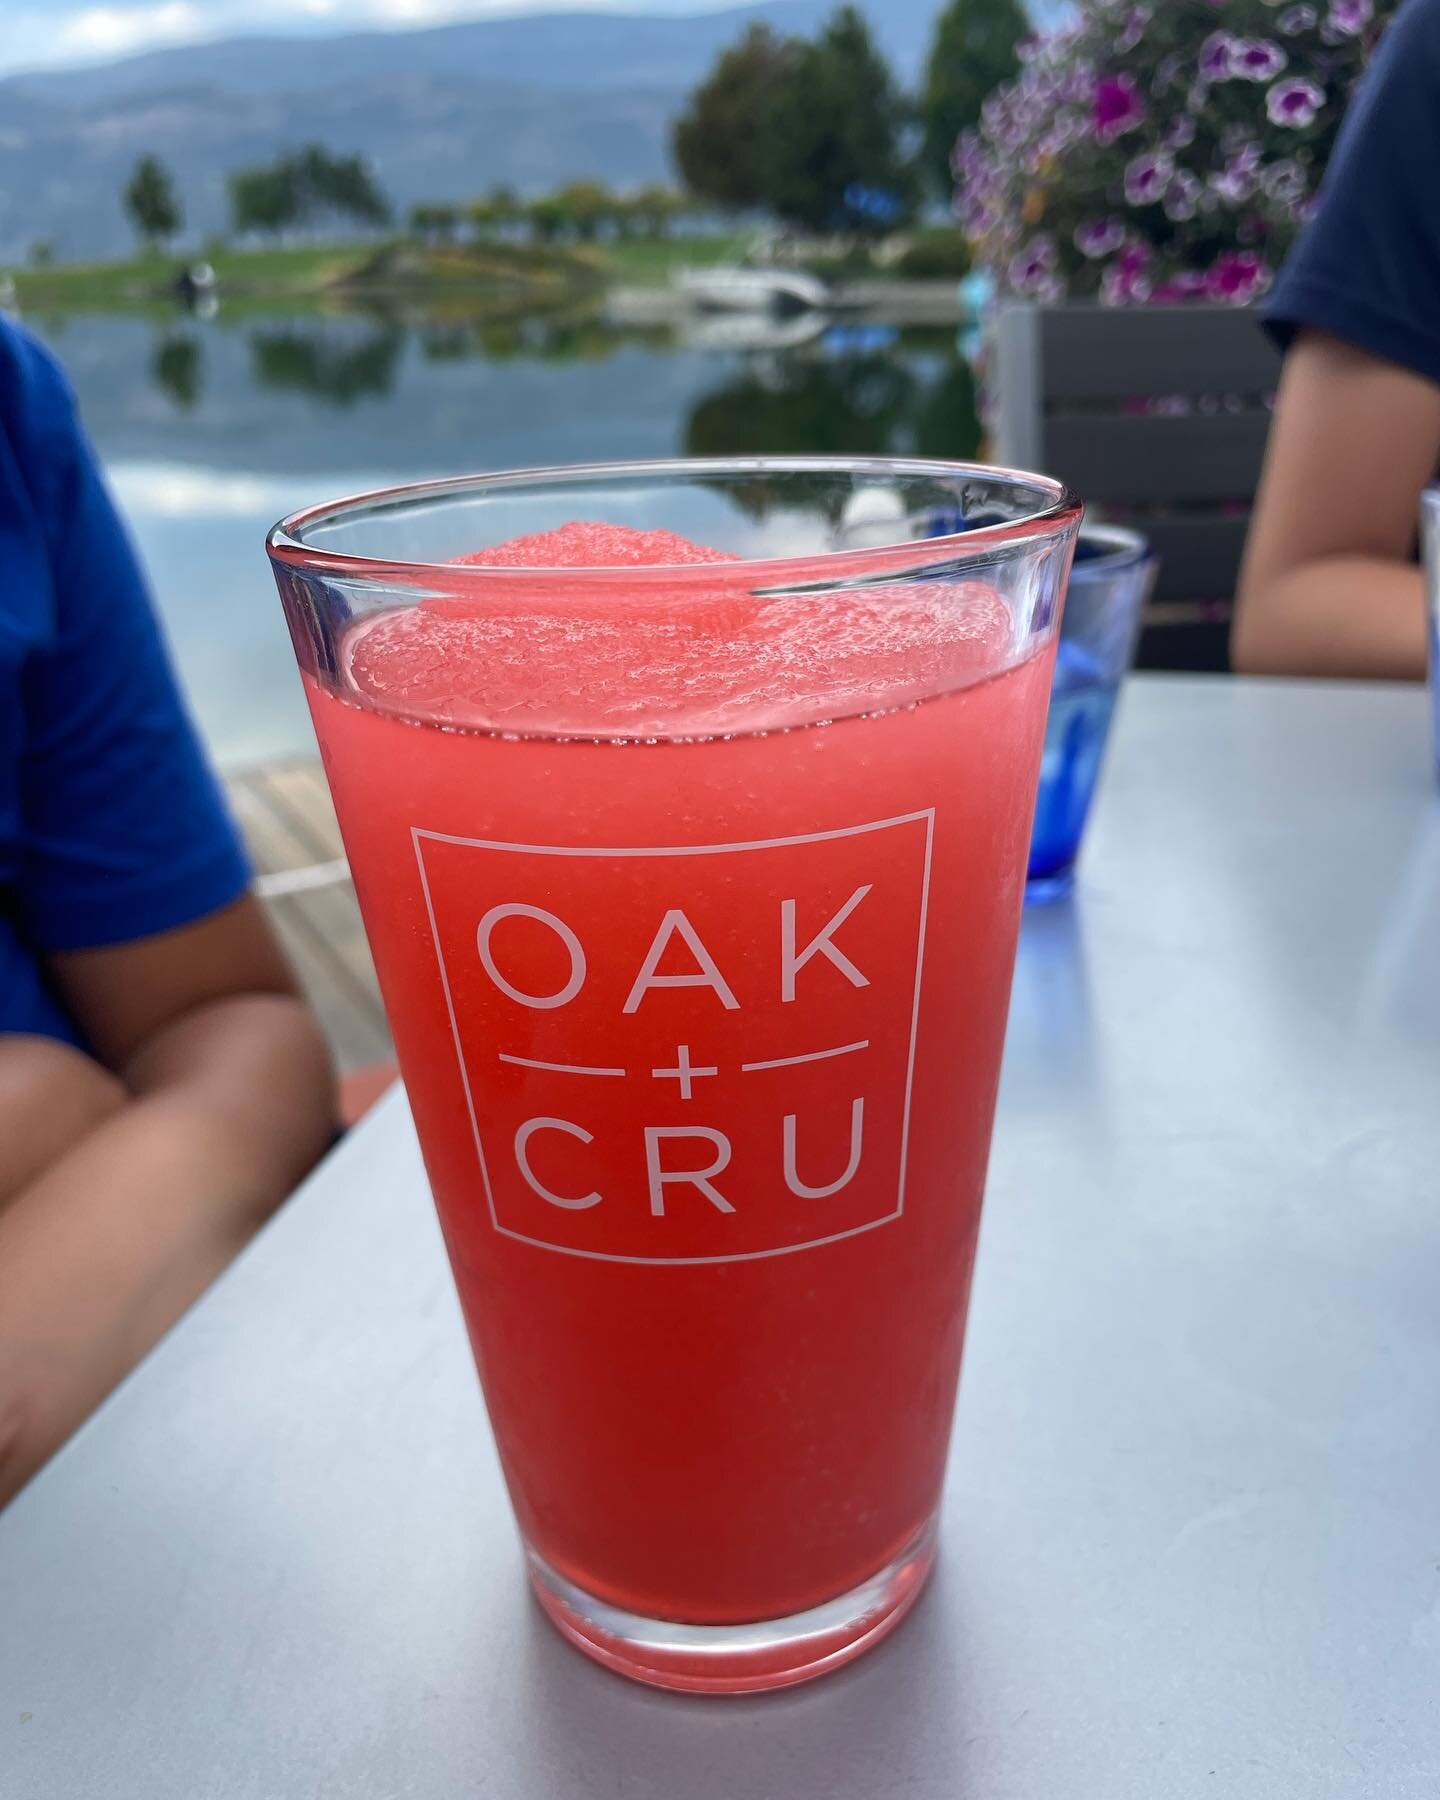 Happy #Wednesday! I am counting down the final days of #summer, one frosty beverage at a time 😉🍹 My family had some business in #kelownabc today and we were able to spend some time downtown on the waterfront ☀️

Thanks for the tasty appys and drink